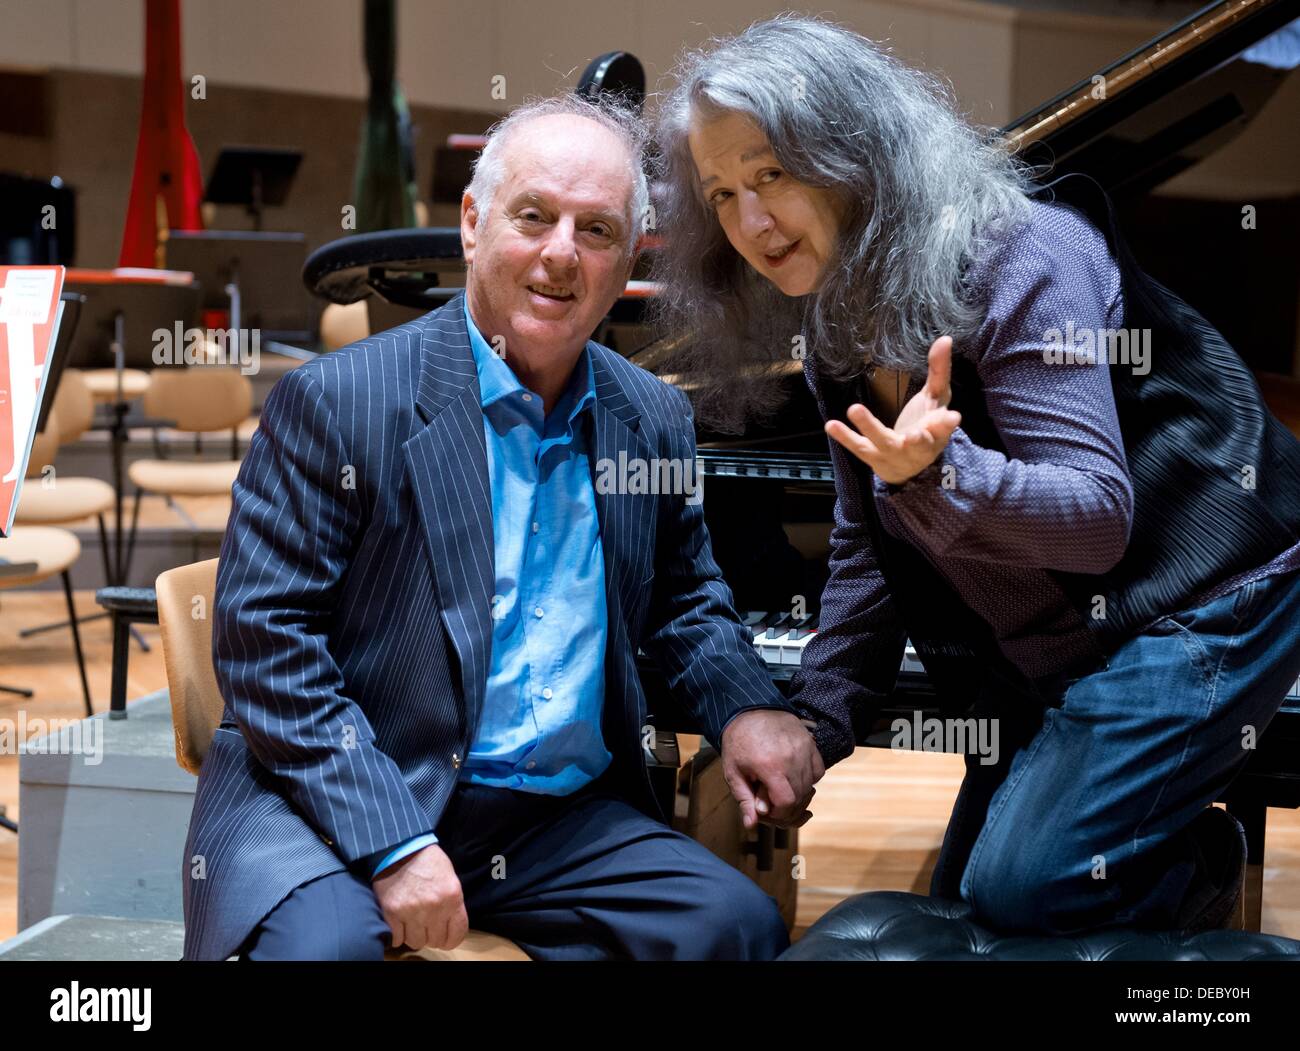 Berlin, Germany. 14th Sep, 2013. Director Daniel Barenboim and the Argetinian piano player, Martha Argerich, talk to each other after a rehearsal in the philharmonic hall of Berlin, Germany, 14 September 2013. Photo: SOEREN STACHE/dpa/Alamy Live News Stock Photo